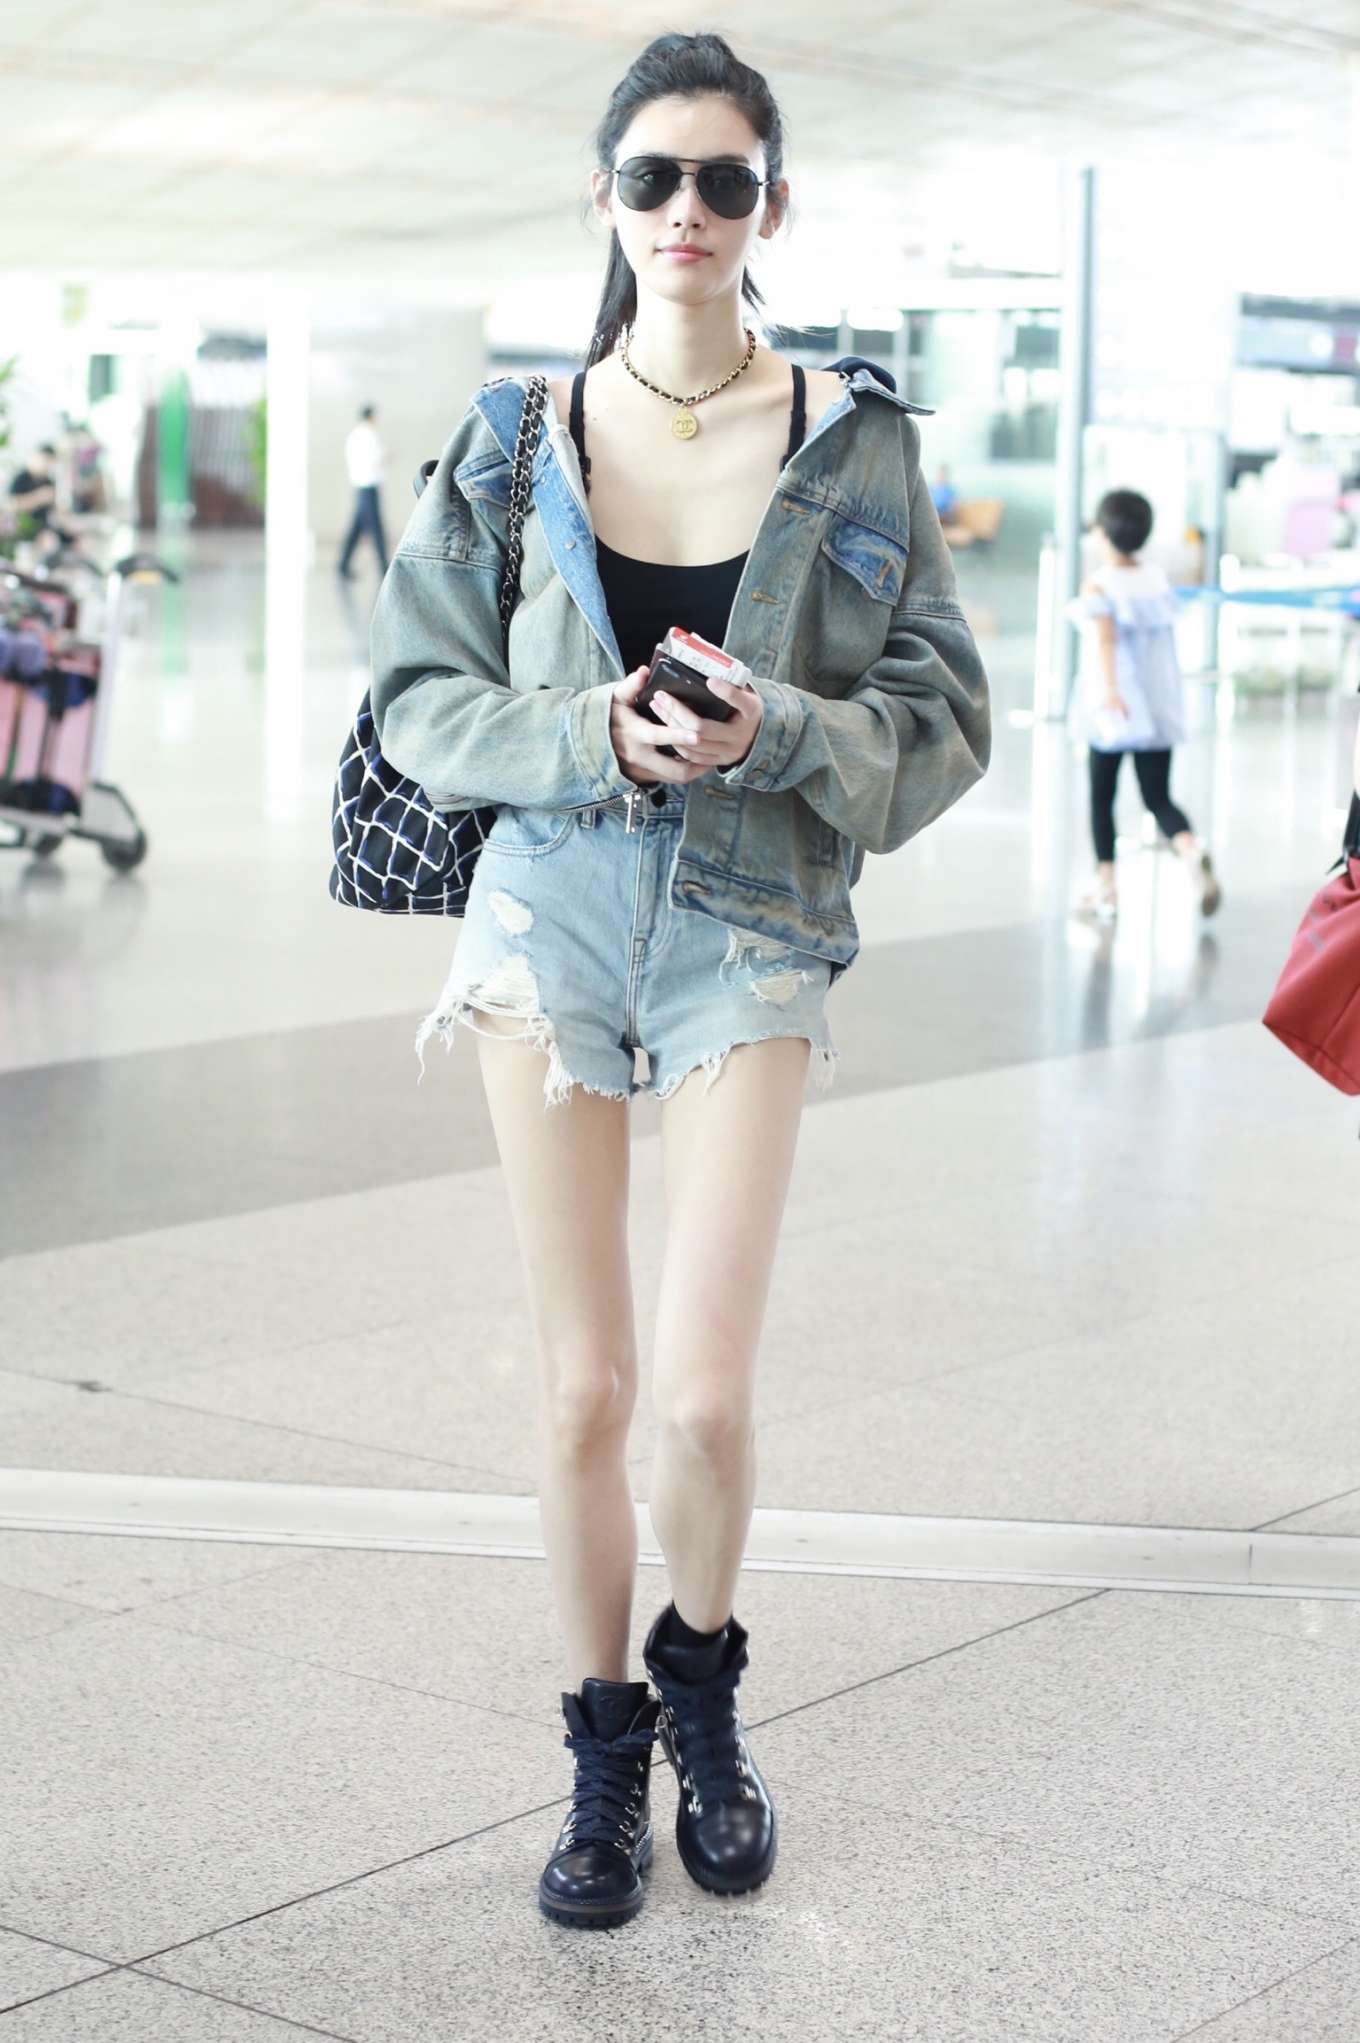 Ming Xi in Jeans at Beijing International Airport